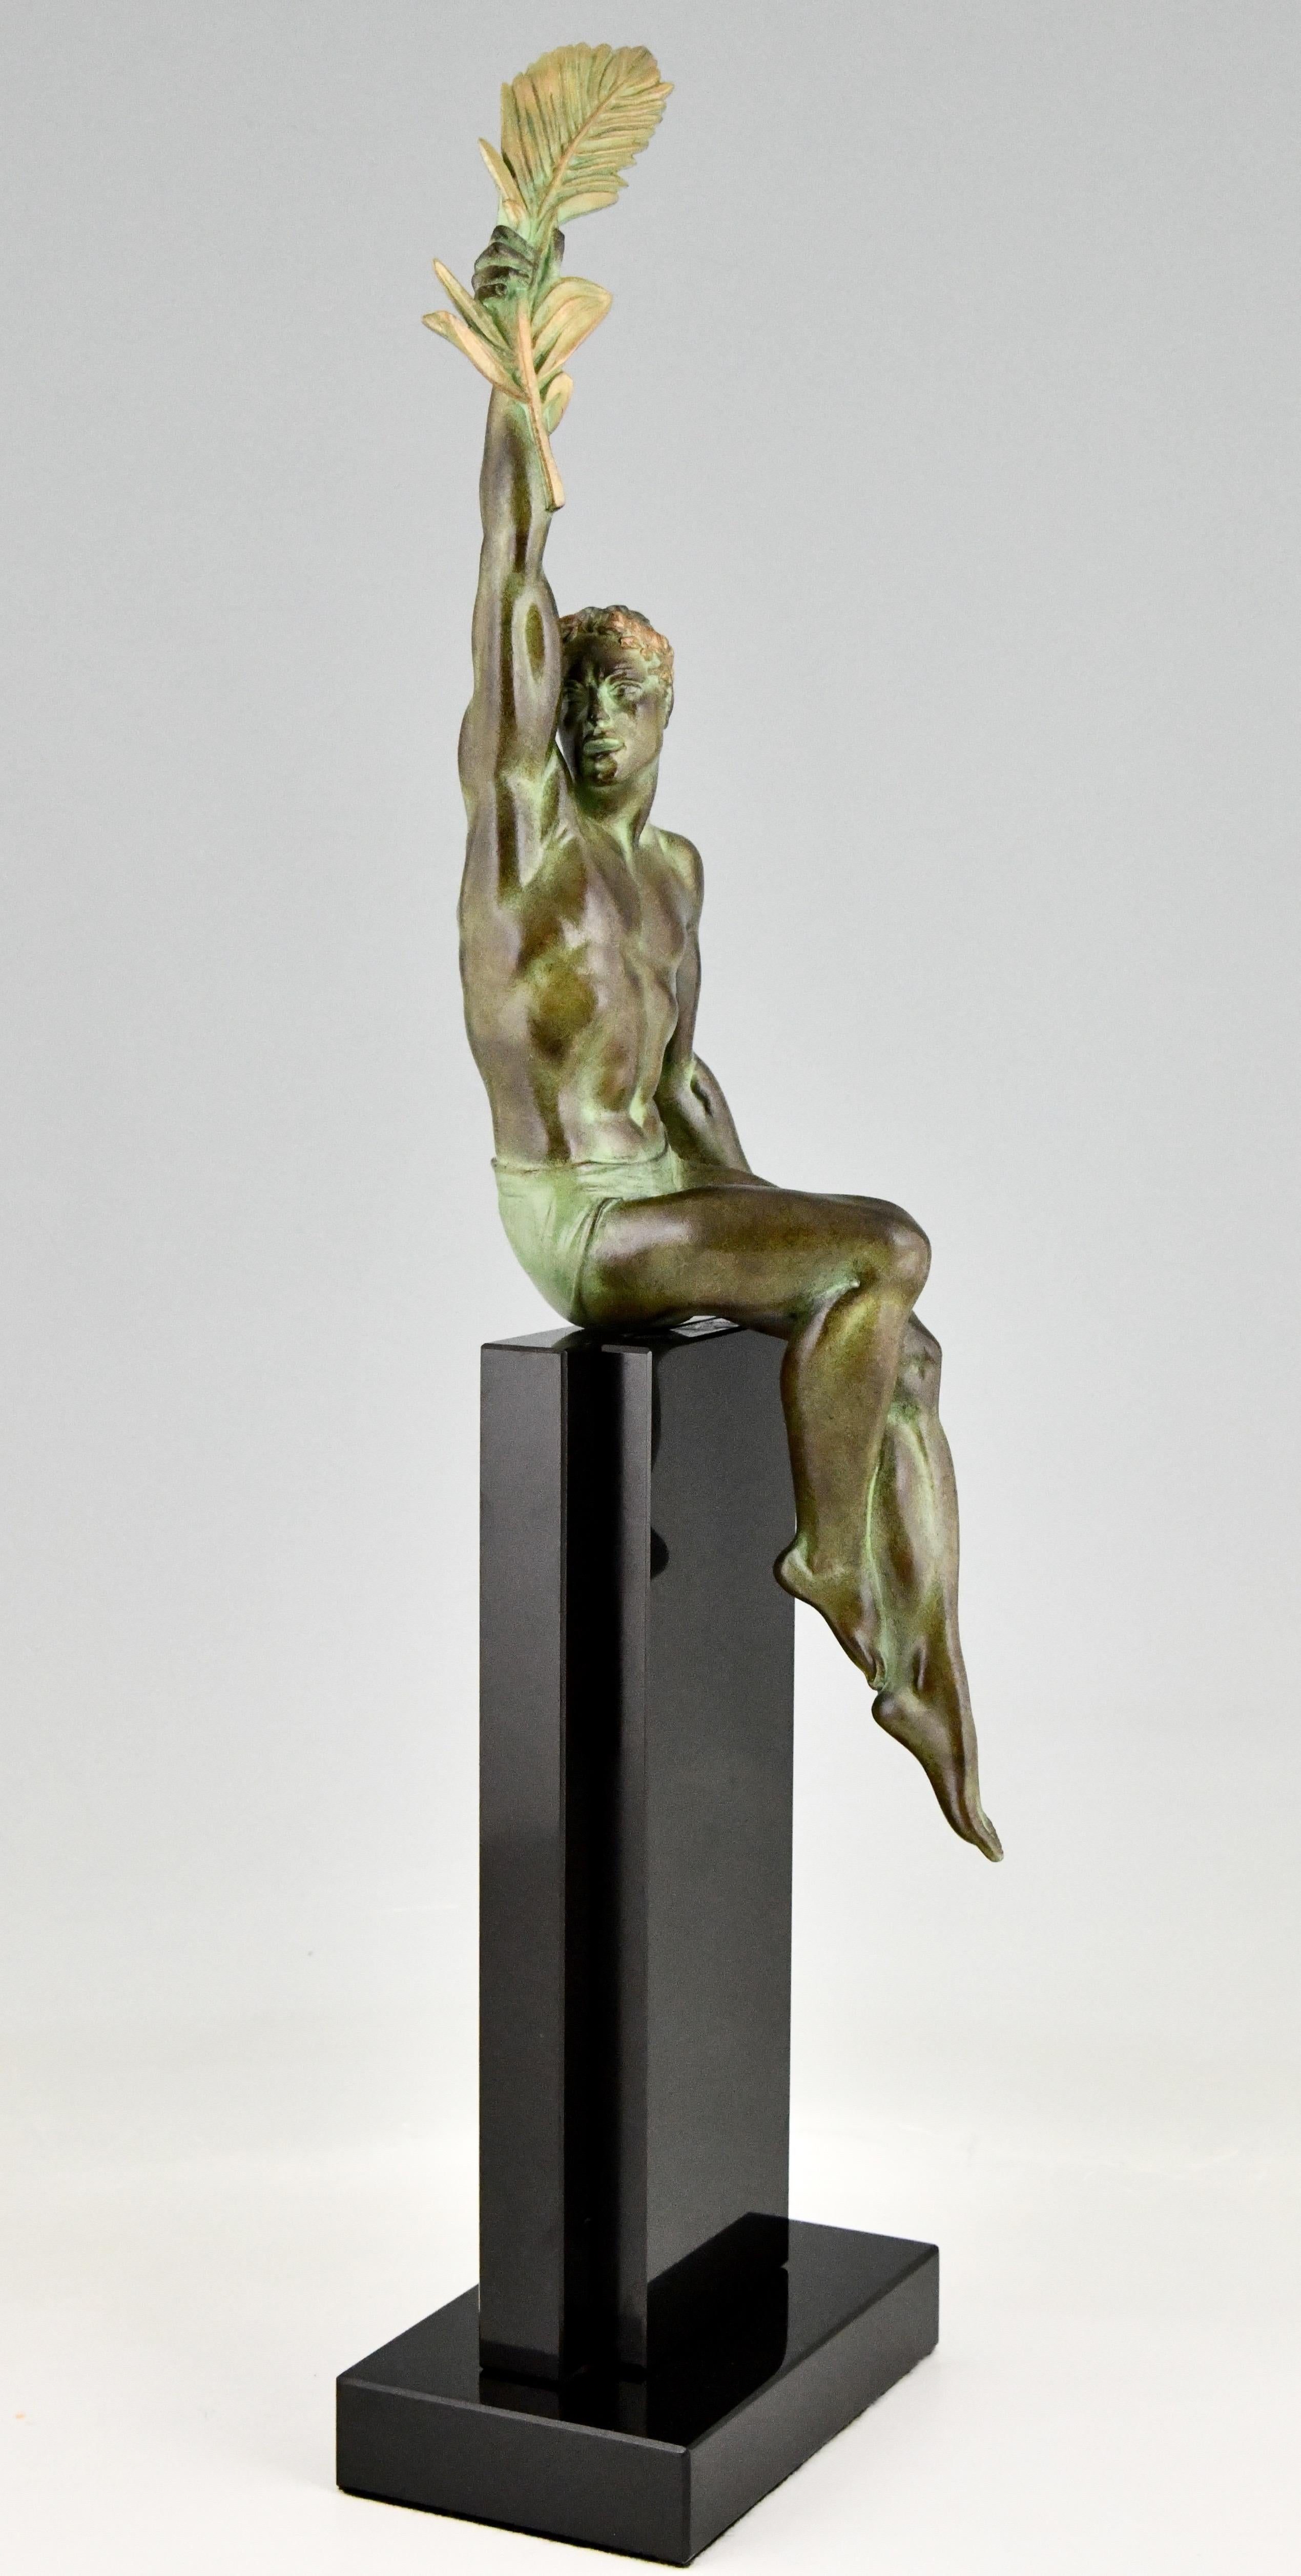 French Art Deco Style Sculpture Athlete with Palm Leaf by Max Le Verrier, Victory